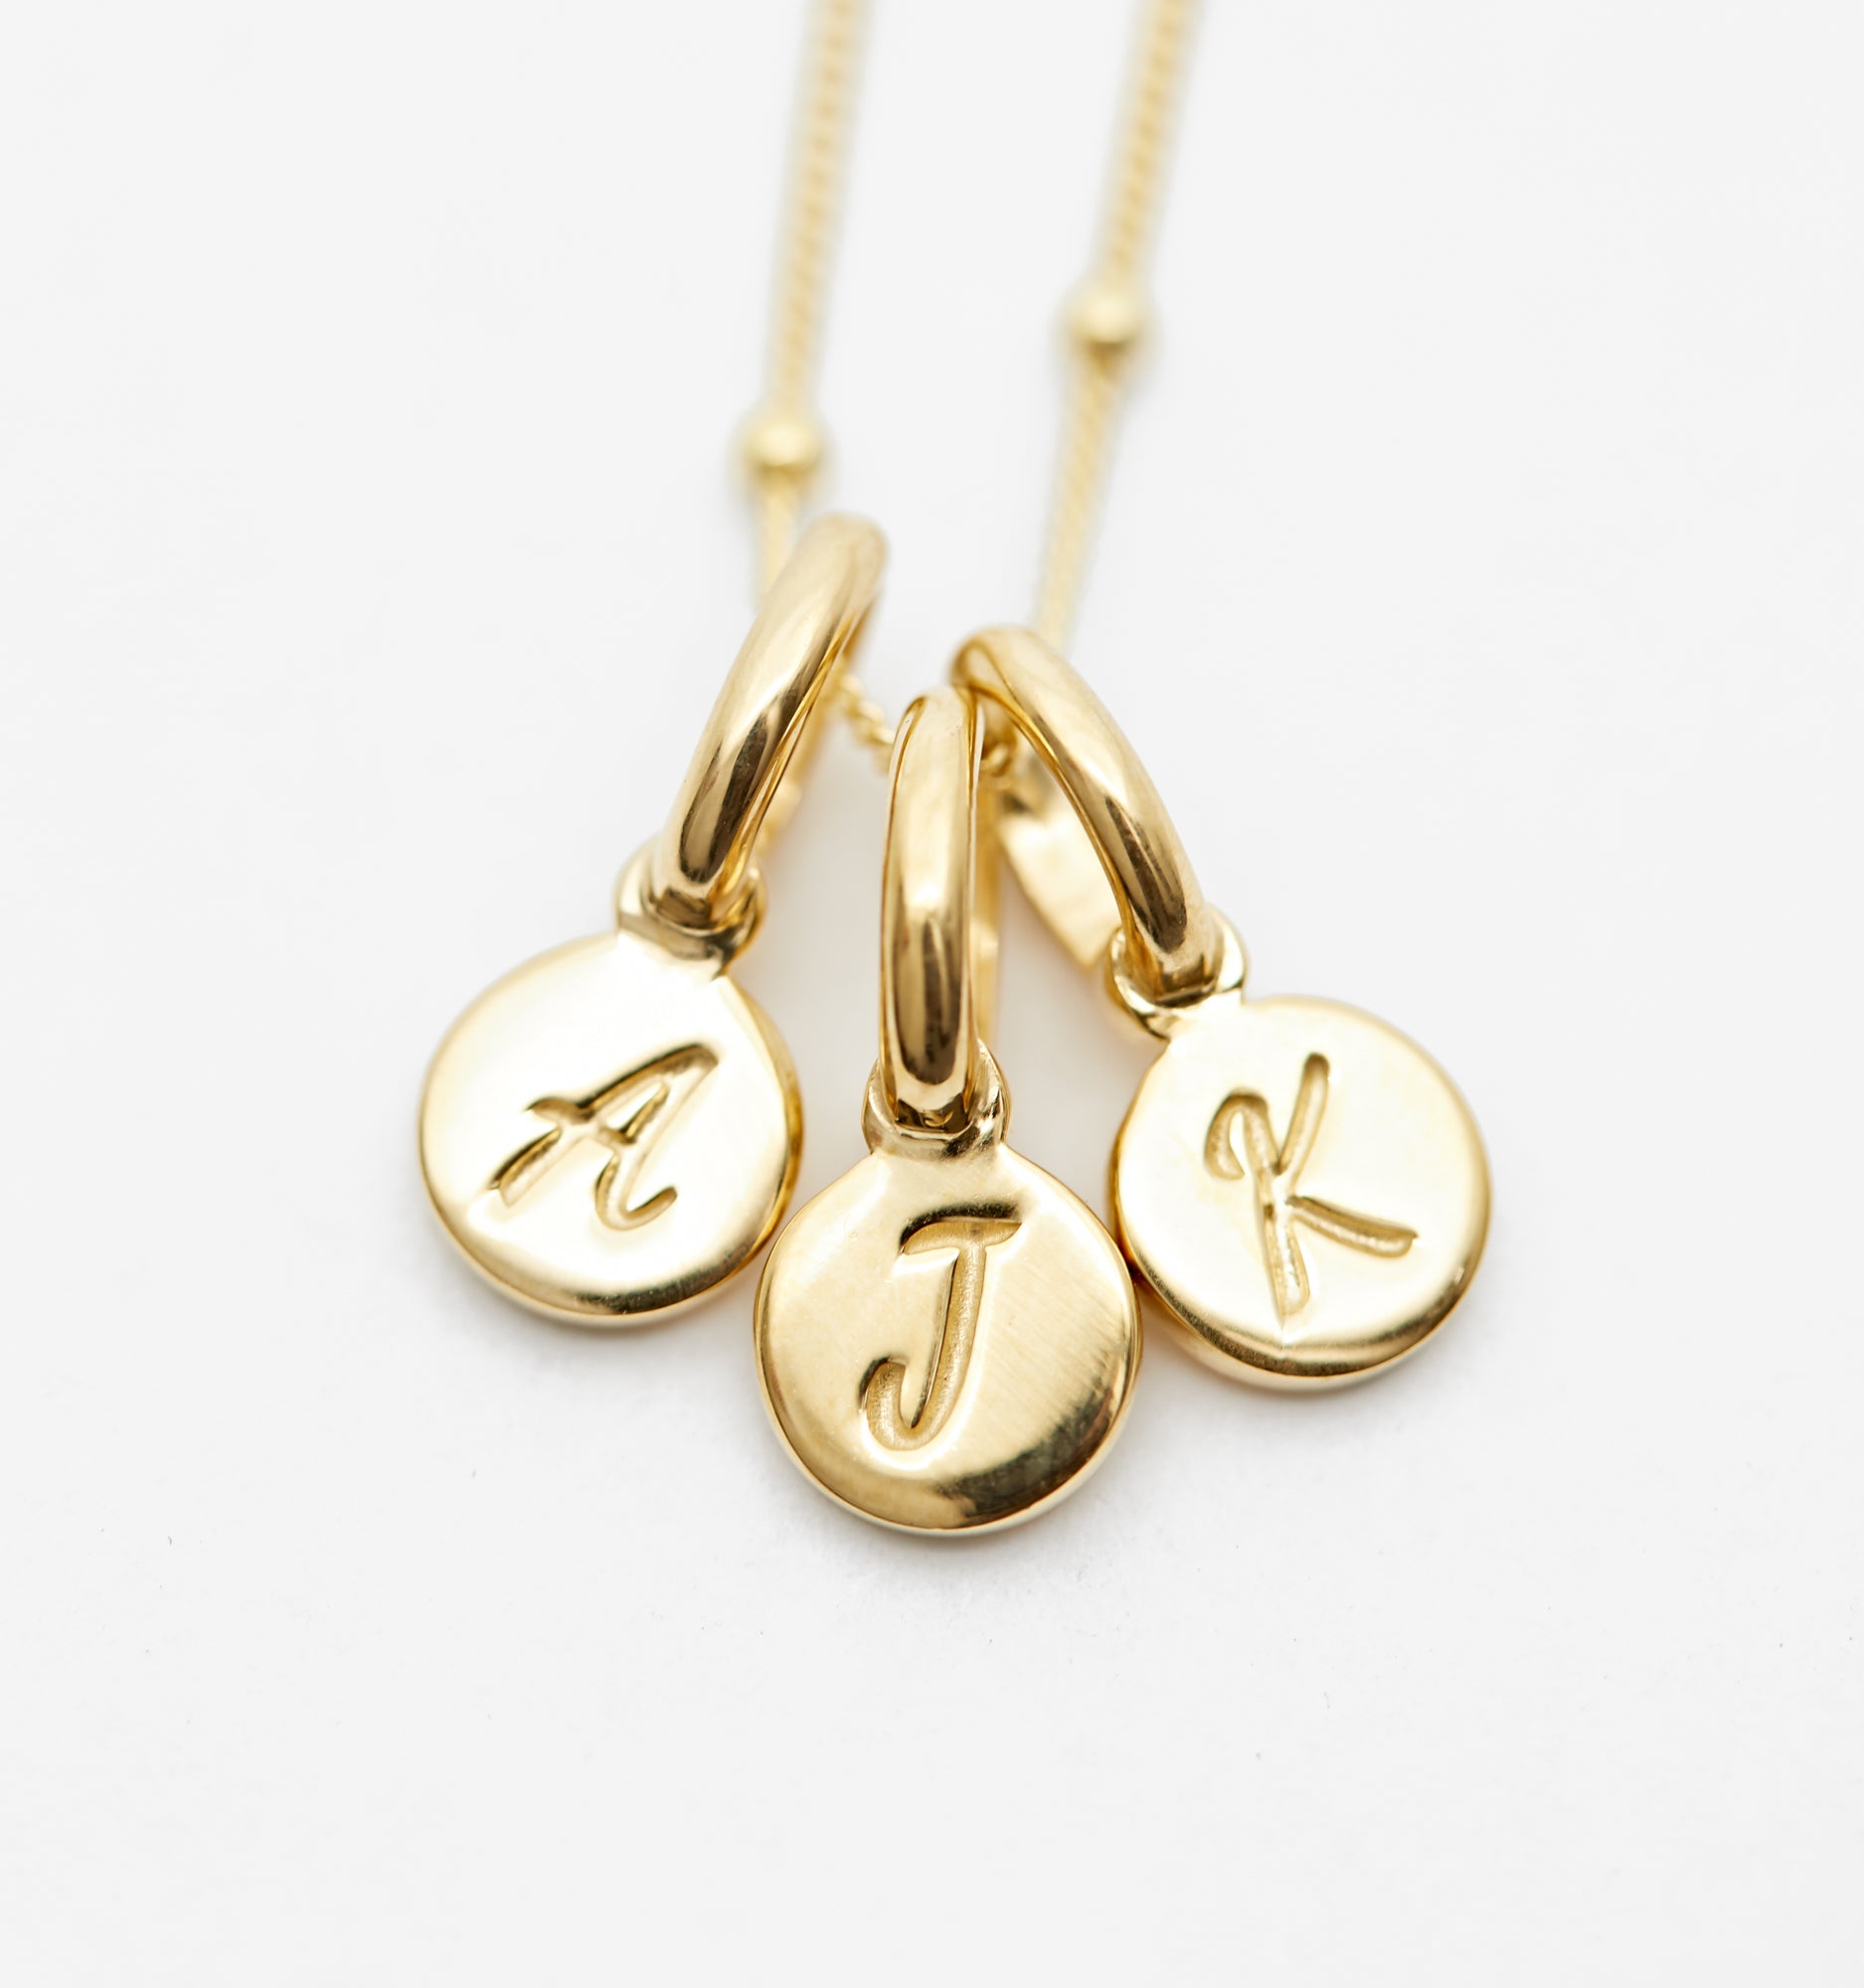 Triple Initials Necklace